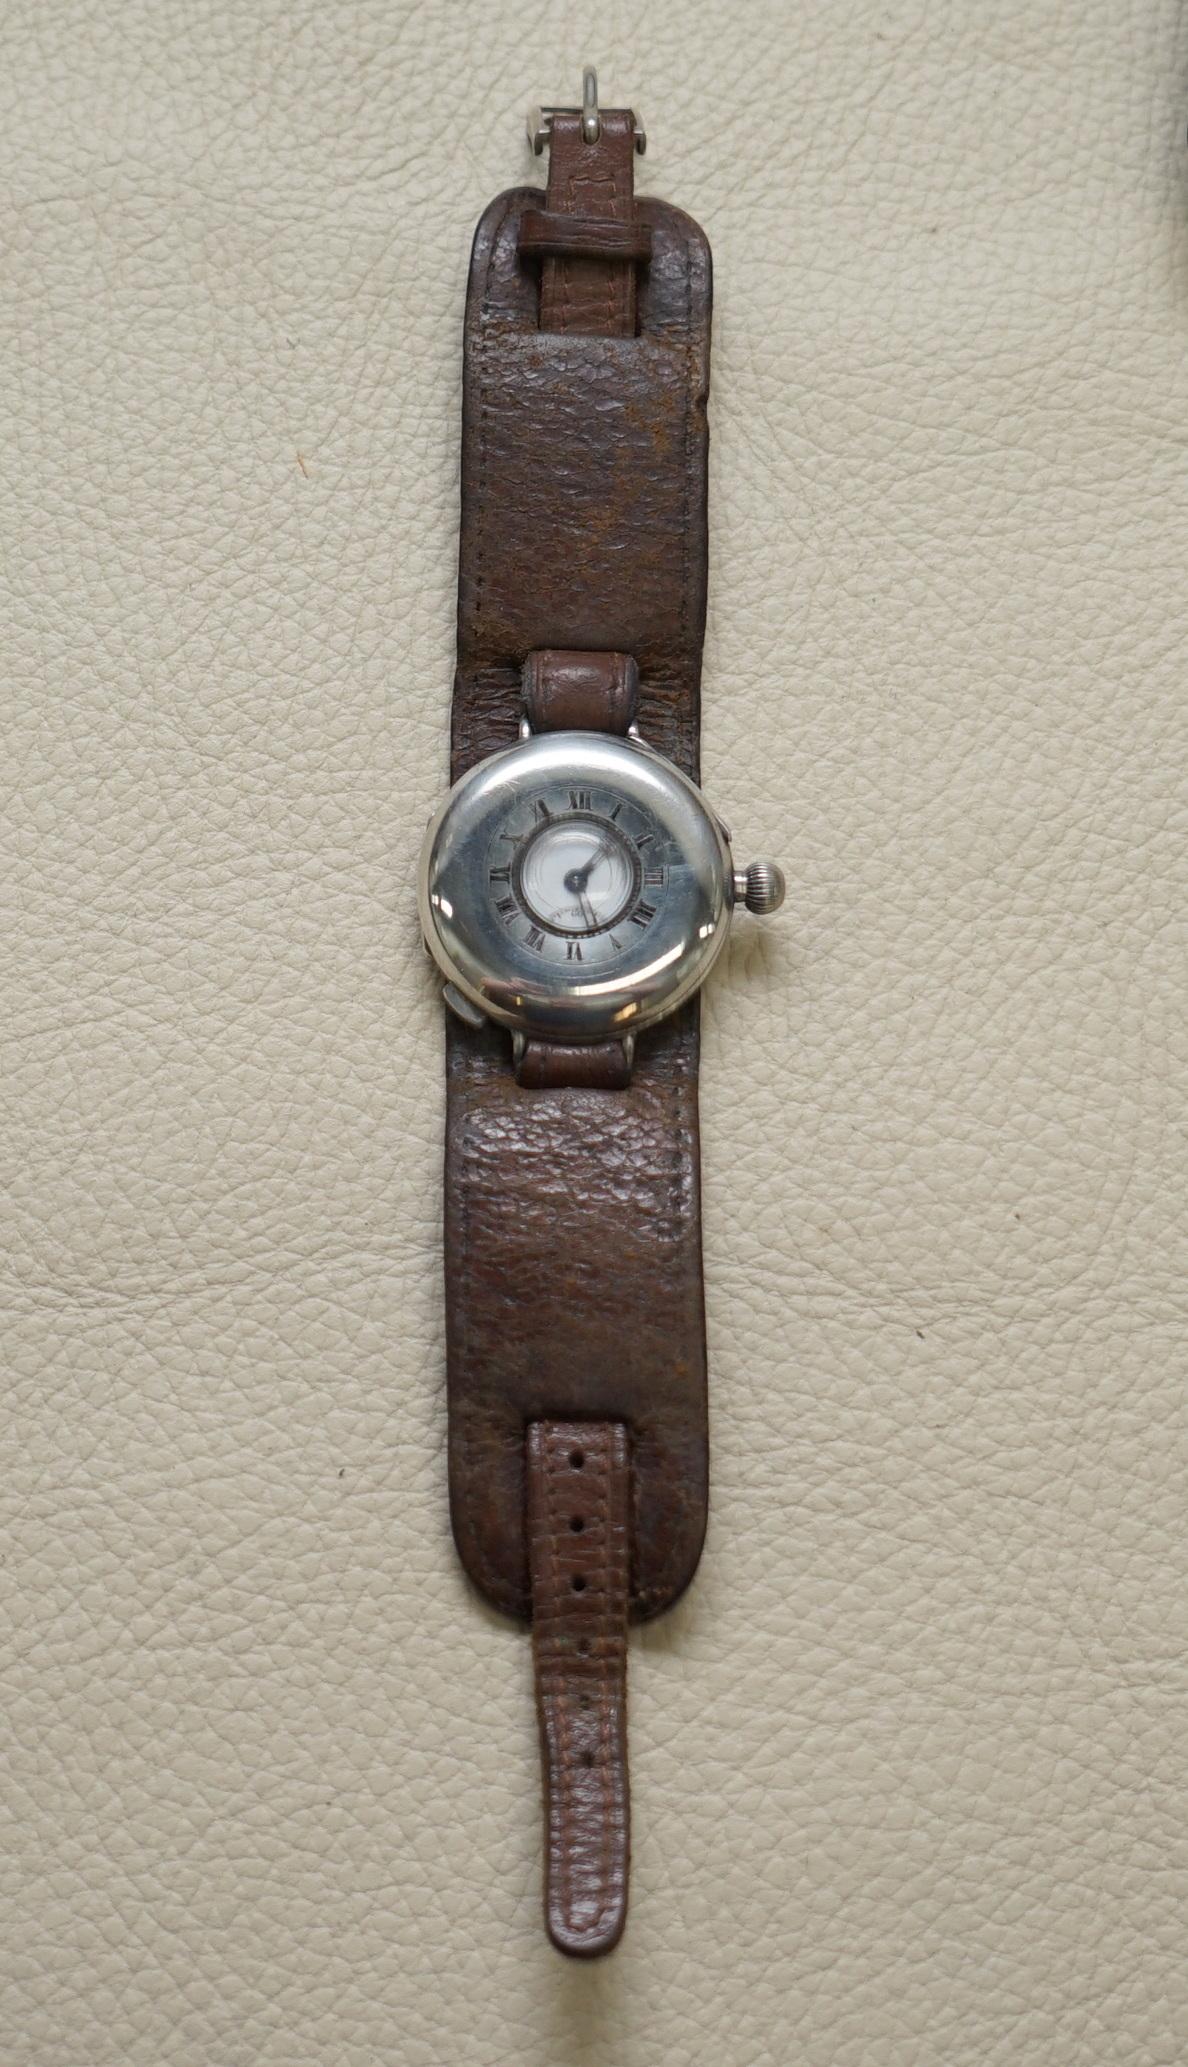 Wimbledon-Furniture

Wimbledon-Furniture is delighted to offer for sale this lovely antique Sterling Silver Aviators watch with half hunter case

A good looking well made and functioning wrist watch, the strap is an aviator brown leather circa 1920,